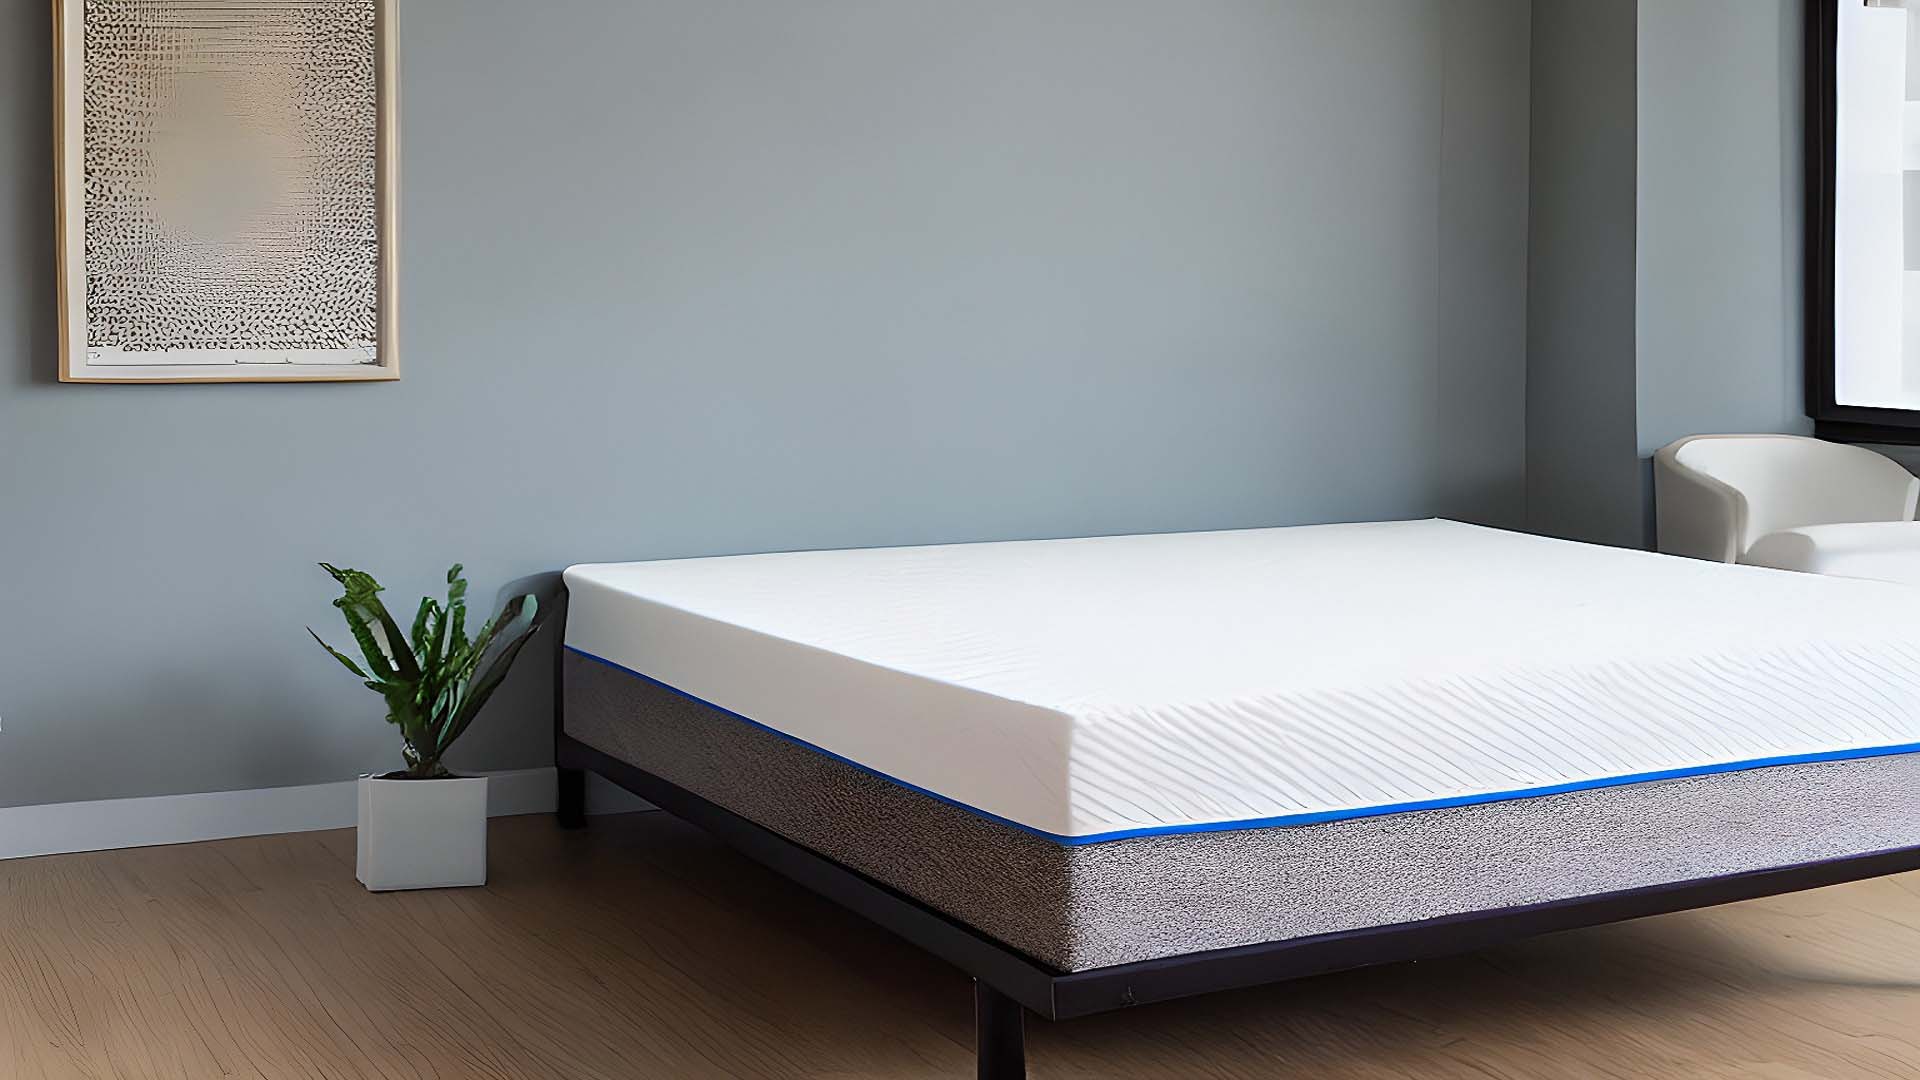 body type, cooling mattress, level, cooling features, airflow, someone, mattress size, course, california, products, experience, warranty, majority, memory foam mattress, investment, pillows, bedding, foams, bedroom, neck, levels, information, search, hundreds, mattress firmness, firmness scale, fabric, cushioning, features, discounts, components, sleep number, saatva, kind, latex foam, springs, mattress shopping, edge, couple, stores, shape, cover, trouble, something, goal, manufacturer, picks, issue, role, anyone, combination sleepers, medium-firm, market, difference, shopping, scale, temperature regulation, warranties, benefit, california king, motion transfer, memory foam mattresses, foam layers, costs, twin, twin xl, right, sheets, contouring, parts, knowledge, testing, airbeds, points, body types, area, video, elements, deals, risk, deal, chances, wear, movements, sales, pillow, addition, example, holidays, customers, order, torso, light, rest, black friday, trial, polyfoam, neck pain, many, each other, three, shoulder, version, categories, coil, body heat, retailer, adults, bottom, company, hand, half, discount, sagging, job, pets, foam beds, spine alignment, thing, hybrid mattresses, idea, stomach sleeper, firmest, alternatives, temperature, any, sides, account, same, polyurethane foam, water, maintenance, joints, delivery, services, defects, sale, benefits, life, side sleeper, links, process, individuals, sleep quality, best, head, end, most, sleep positions, sinkage, shipping, middle